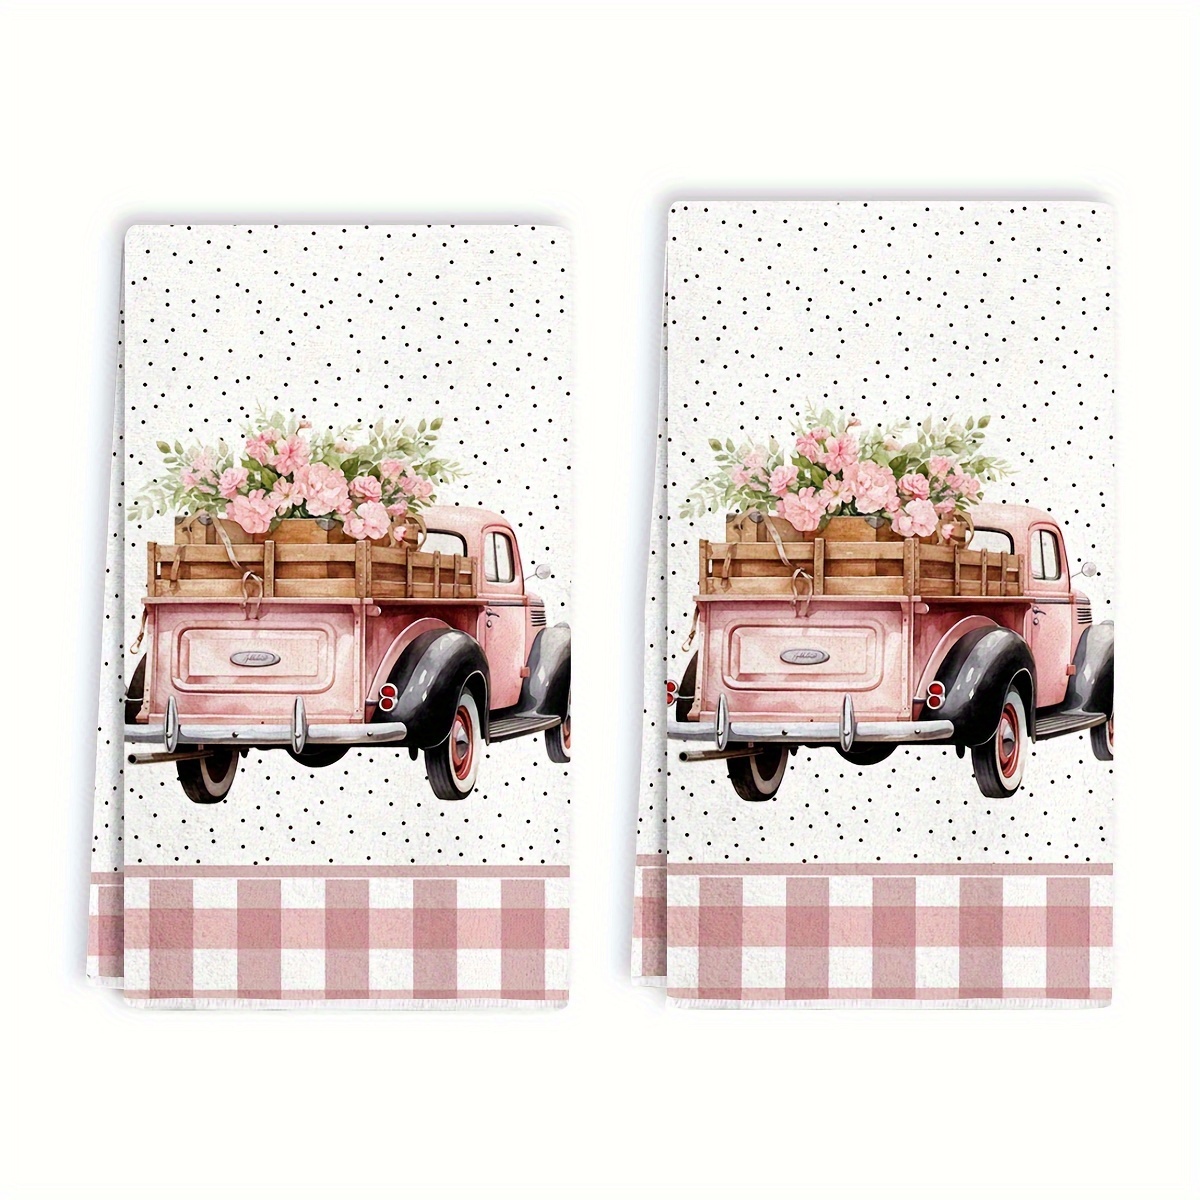 

2pcs, Hand Towels, Floral Pink Truck Printed Dish Towels, Ultra-fine Microfiber Contemporary Absorbent Dish Cloths, Tea Towels For Cooking, Baking, Housewarming Gift